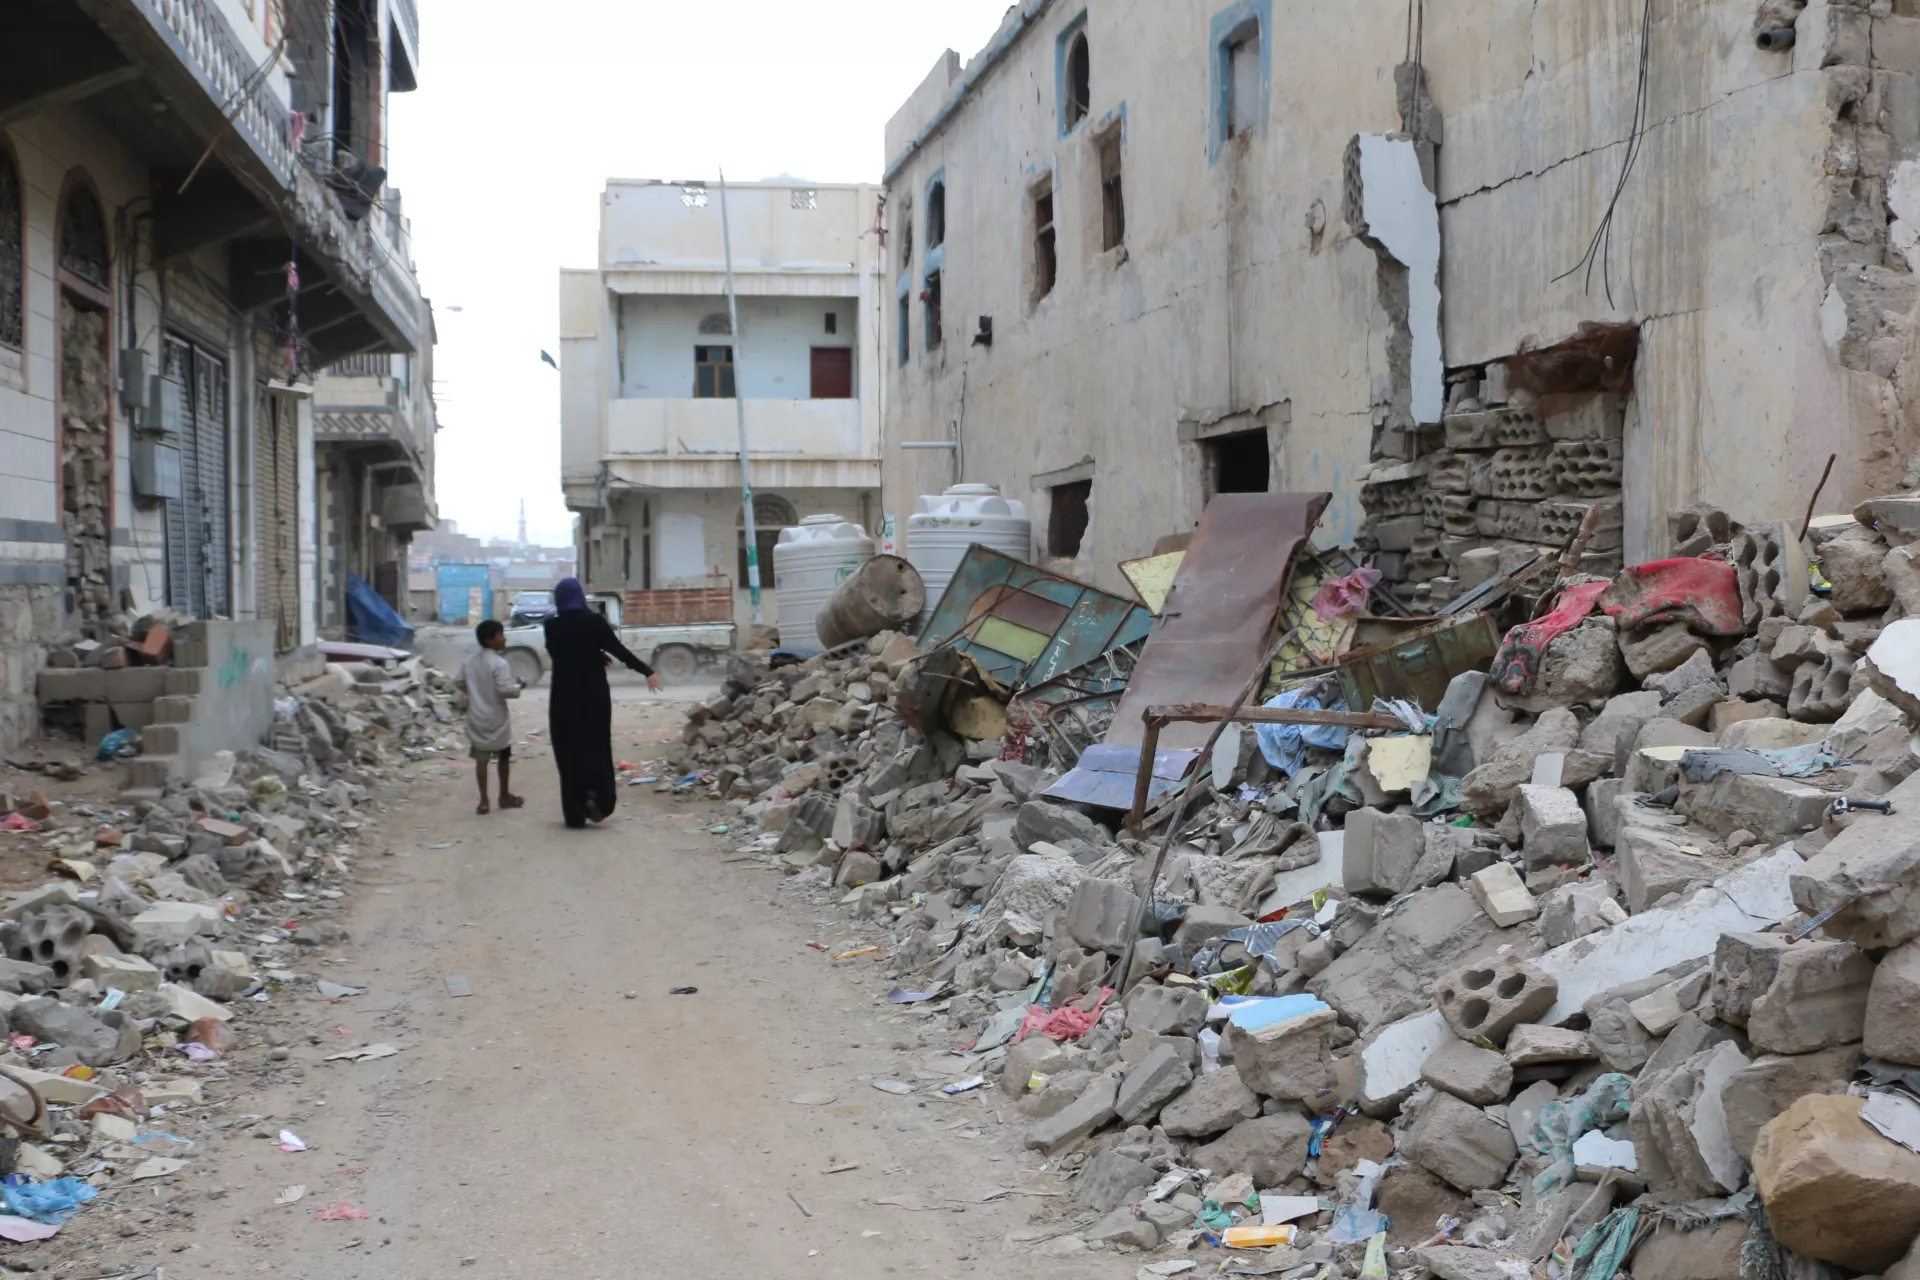 10-year-old Fahd walks past the destruction caused by the conflict.